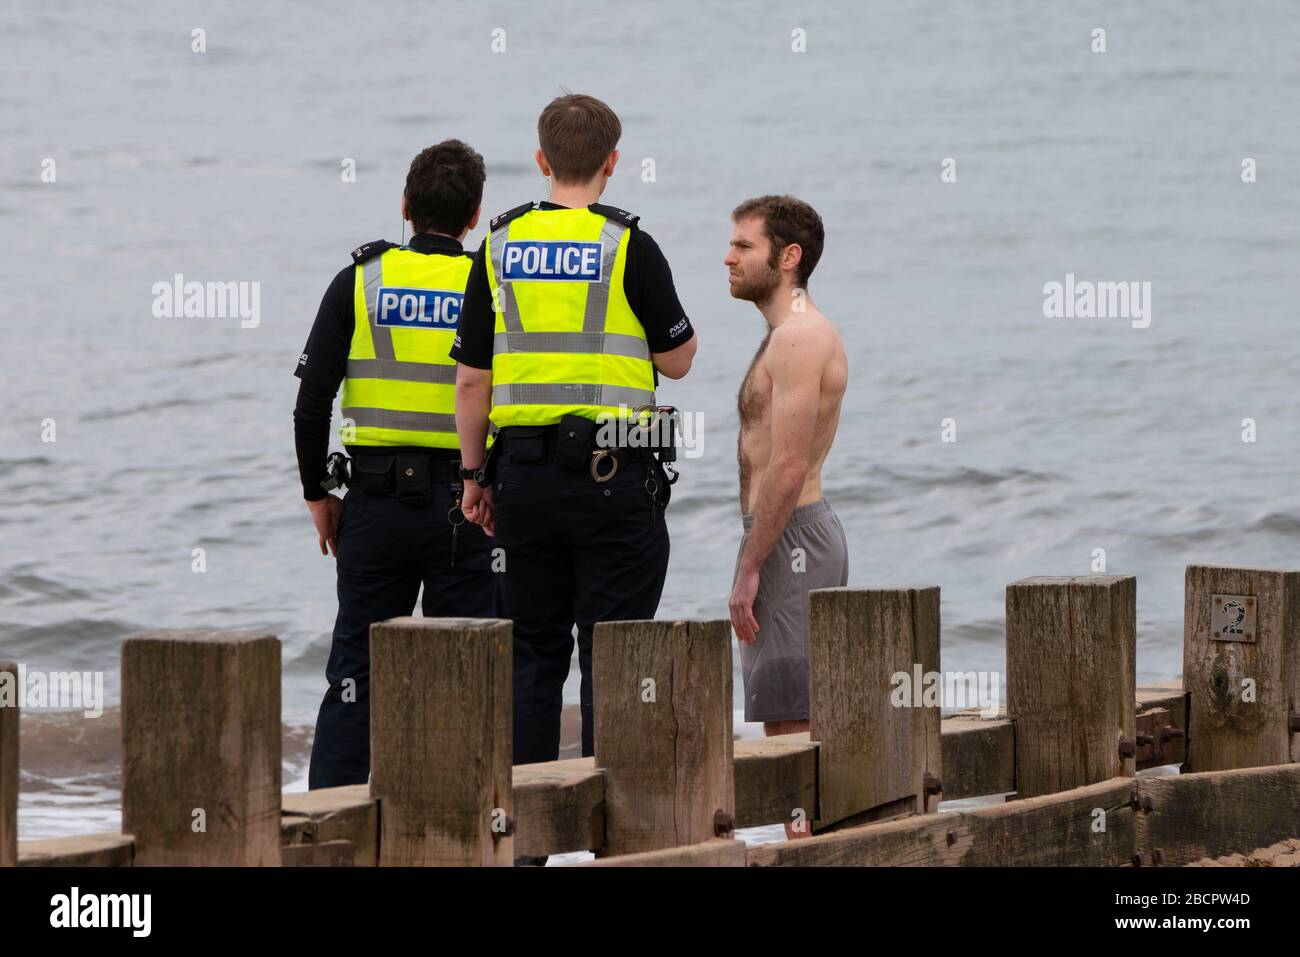 Portobello, Edinburgh, Scotland, UK. 5 April, 2020. On the second Sunday of the coronavirus lockdown in the UK the public are outside taking their daily exercise. Pictured. Police talk to man in swimming trunks on beach at Portobello. After discussion the man was allowed to continue with his swim. Iain Masterton/Alamy Live News Stock Photo